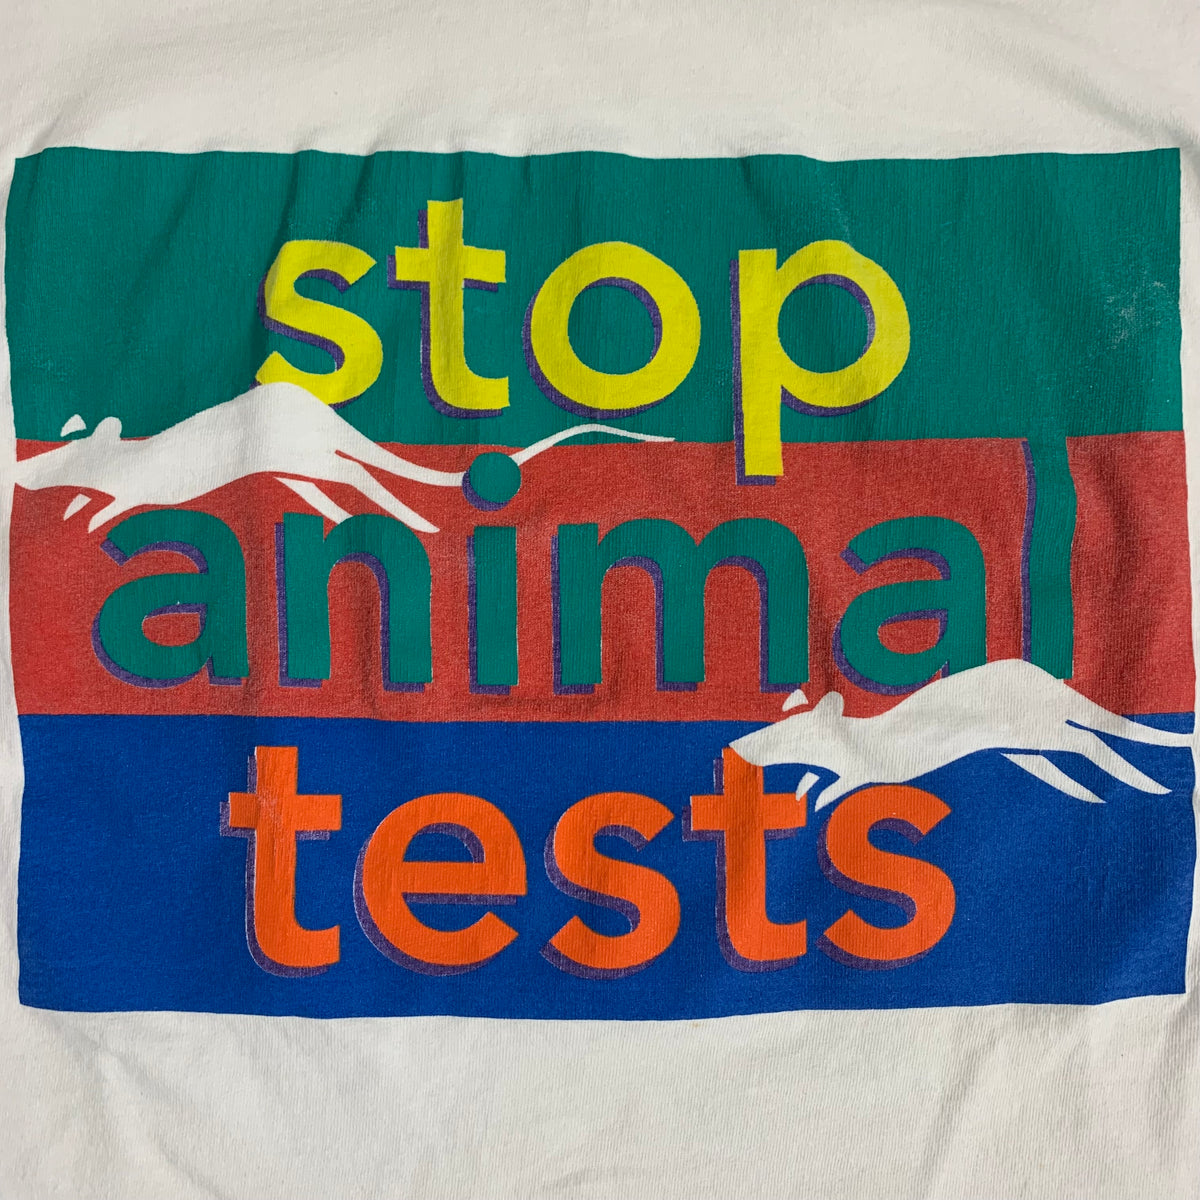 Vintage People For The Ethical Treatment Of Animals &quot;Stop Animal Tests&quot; T-Shirt